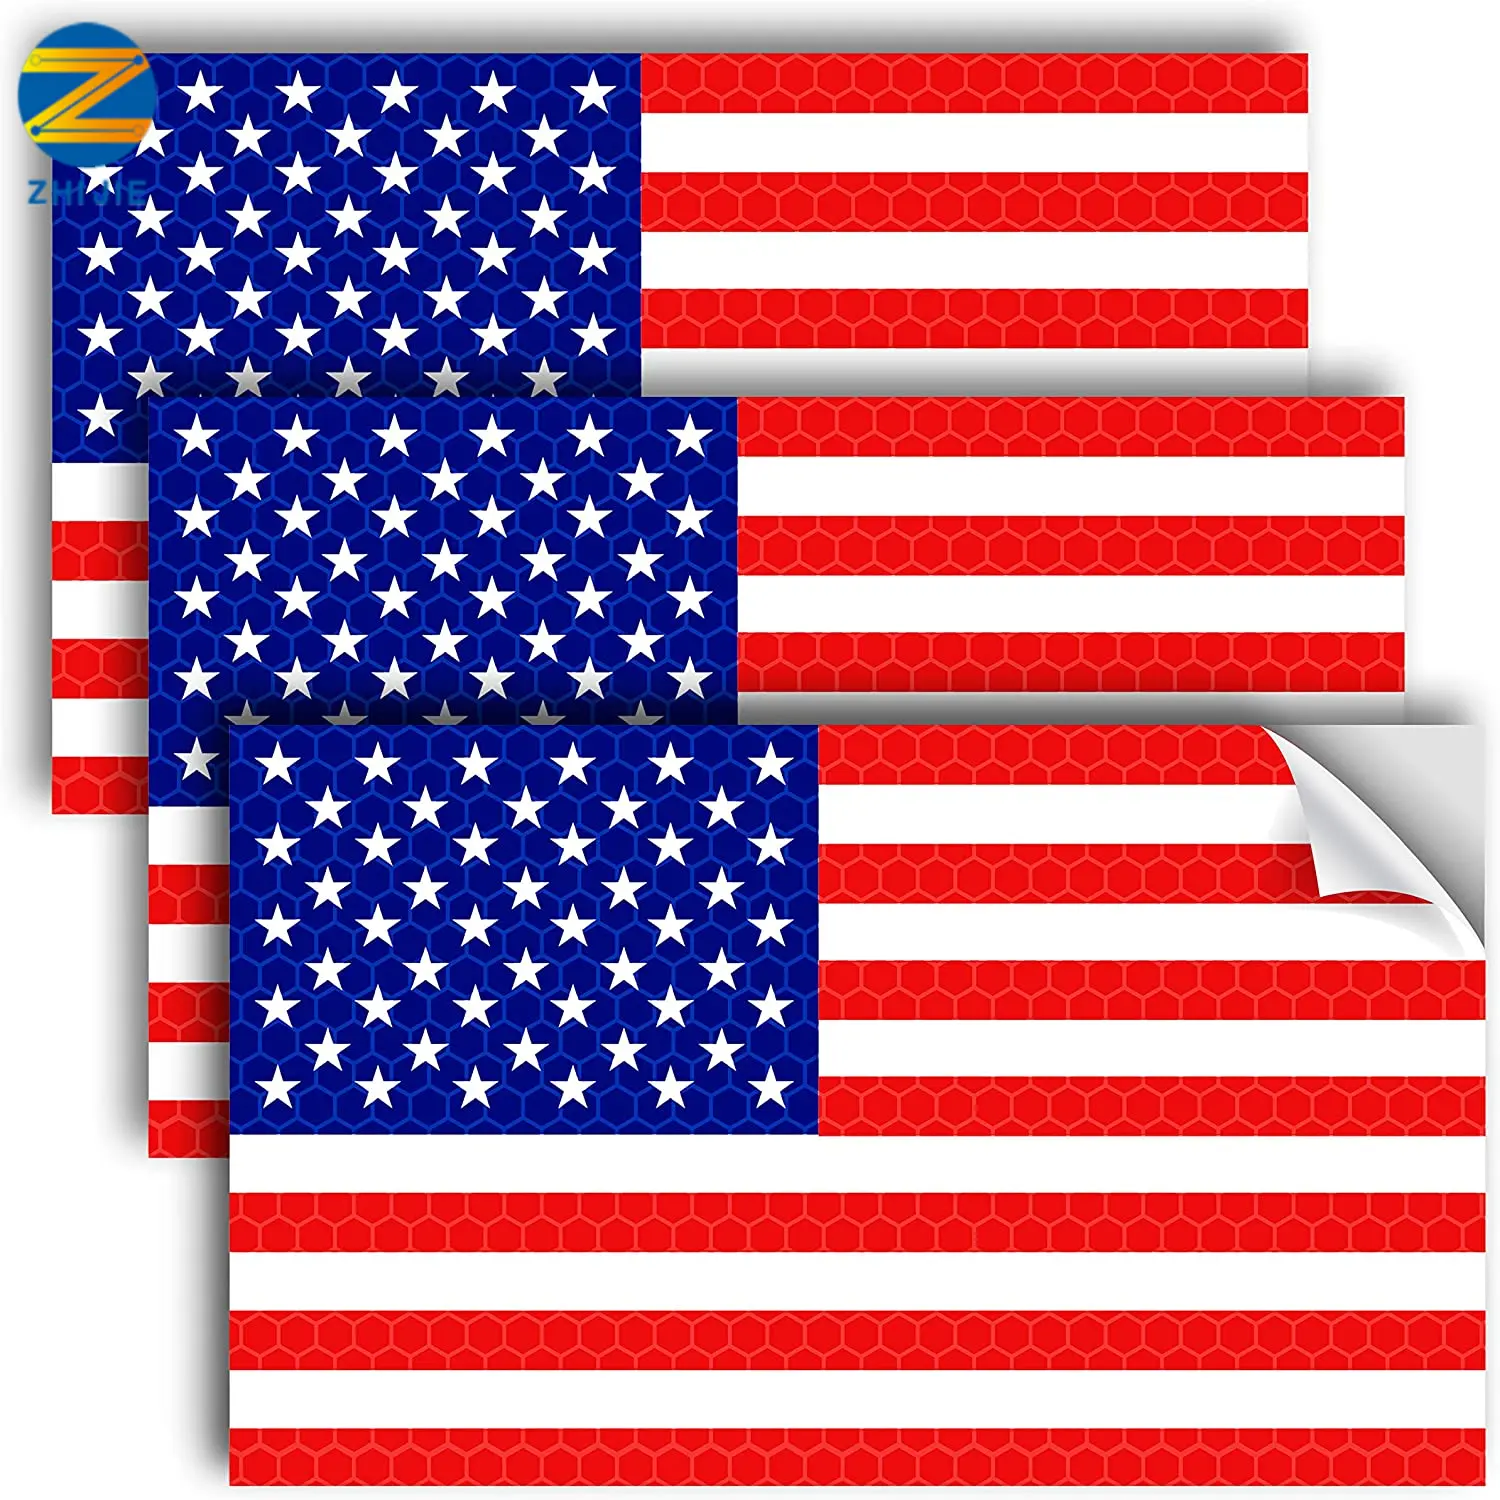 American US Flag Reflective Bumper Sticker 5X3 Inch Support US Military Decals Vinyl